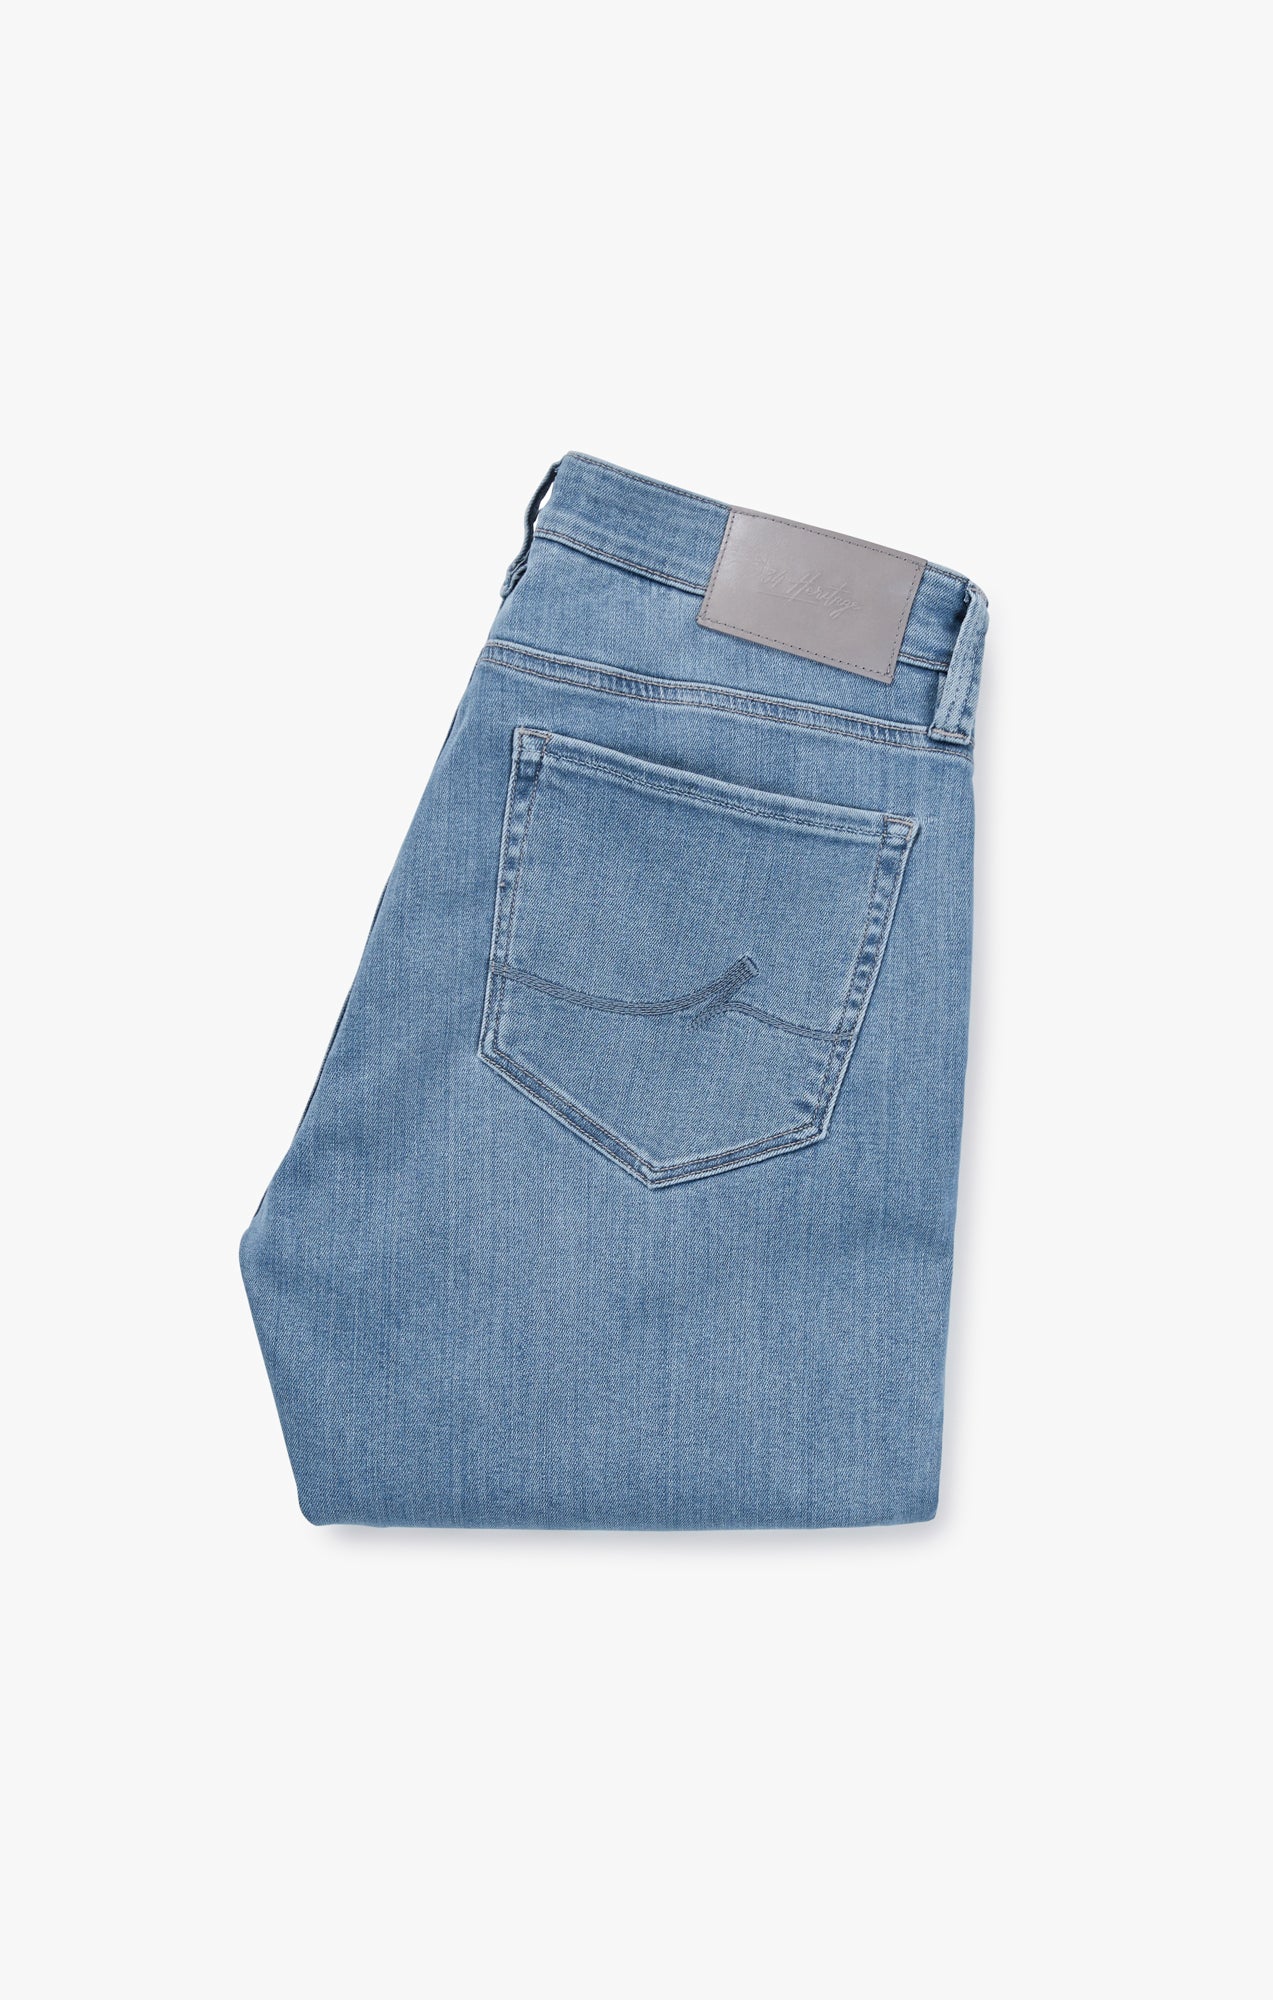 Courage Straight Leg Jeans In Light Brushed Urban Image 8